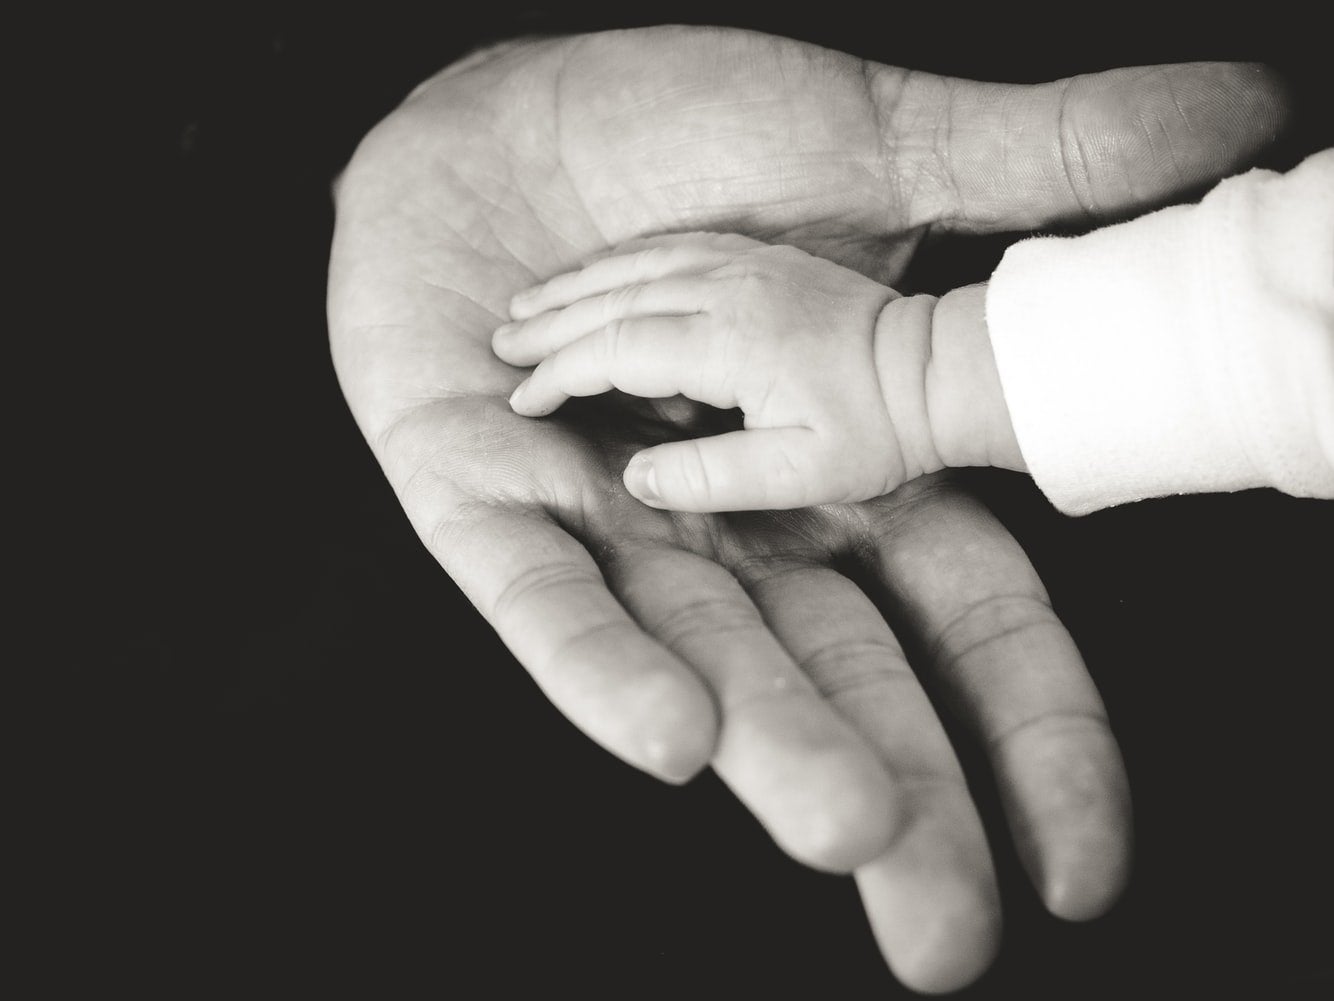 A baby\'s hand resting in the hand of their parent